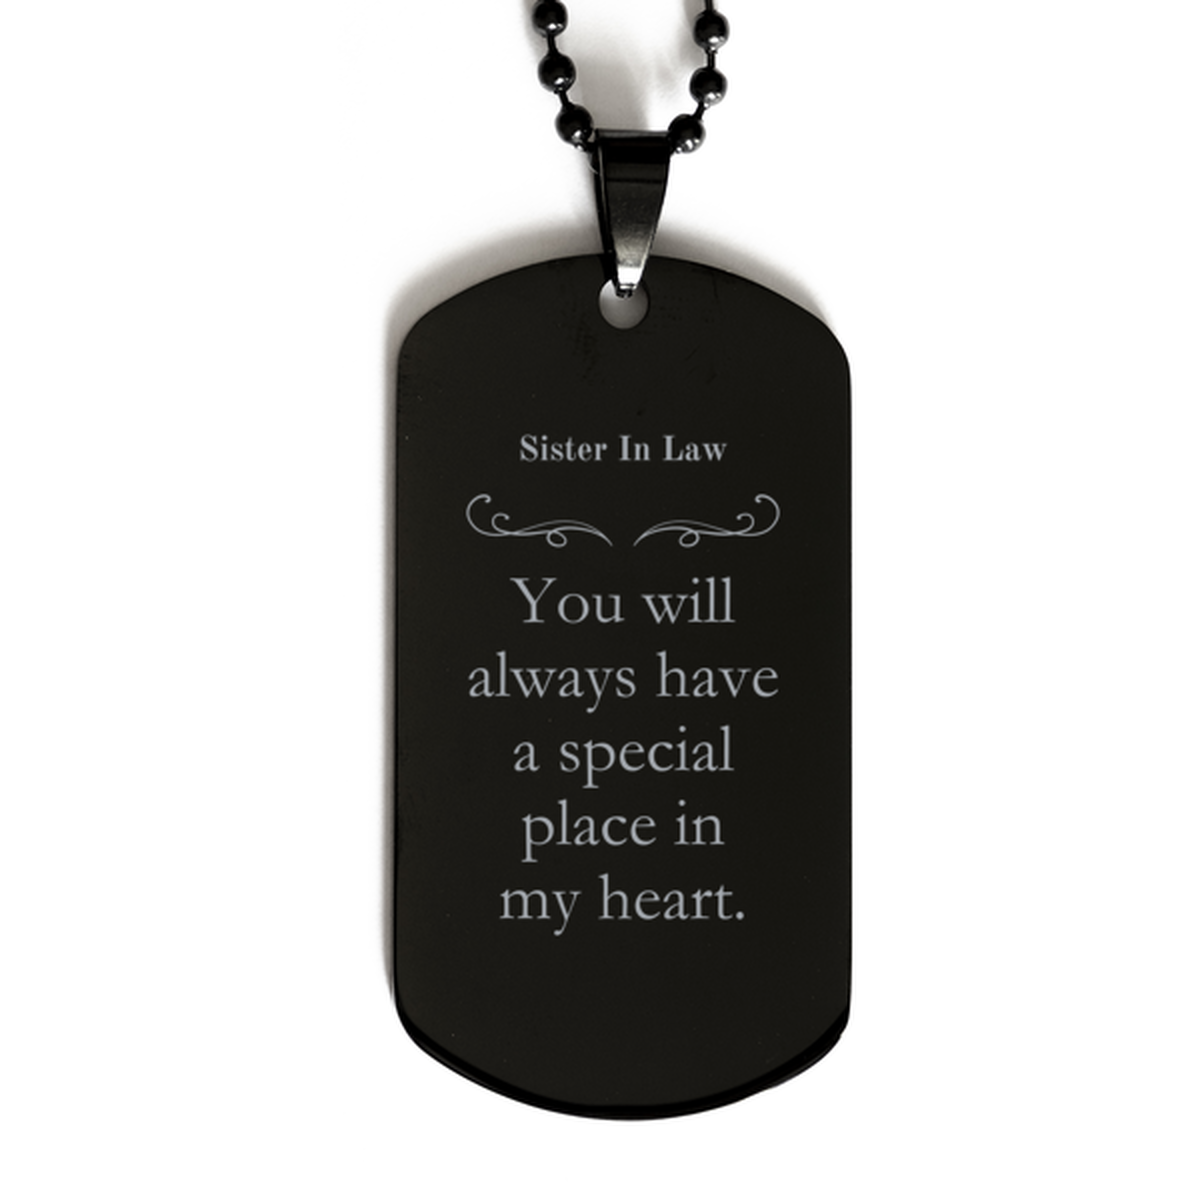 Black Dog Tag for Sister In Law - You will always have a special place in my heart. Engraved Birthday, Christmas, Graduation Gift for Sister In Law - Unique and Inspirational Jewelry to show Sister In Law you care about her - Perfect Sister In Law Gift f